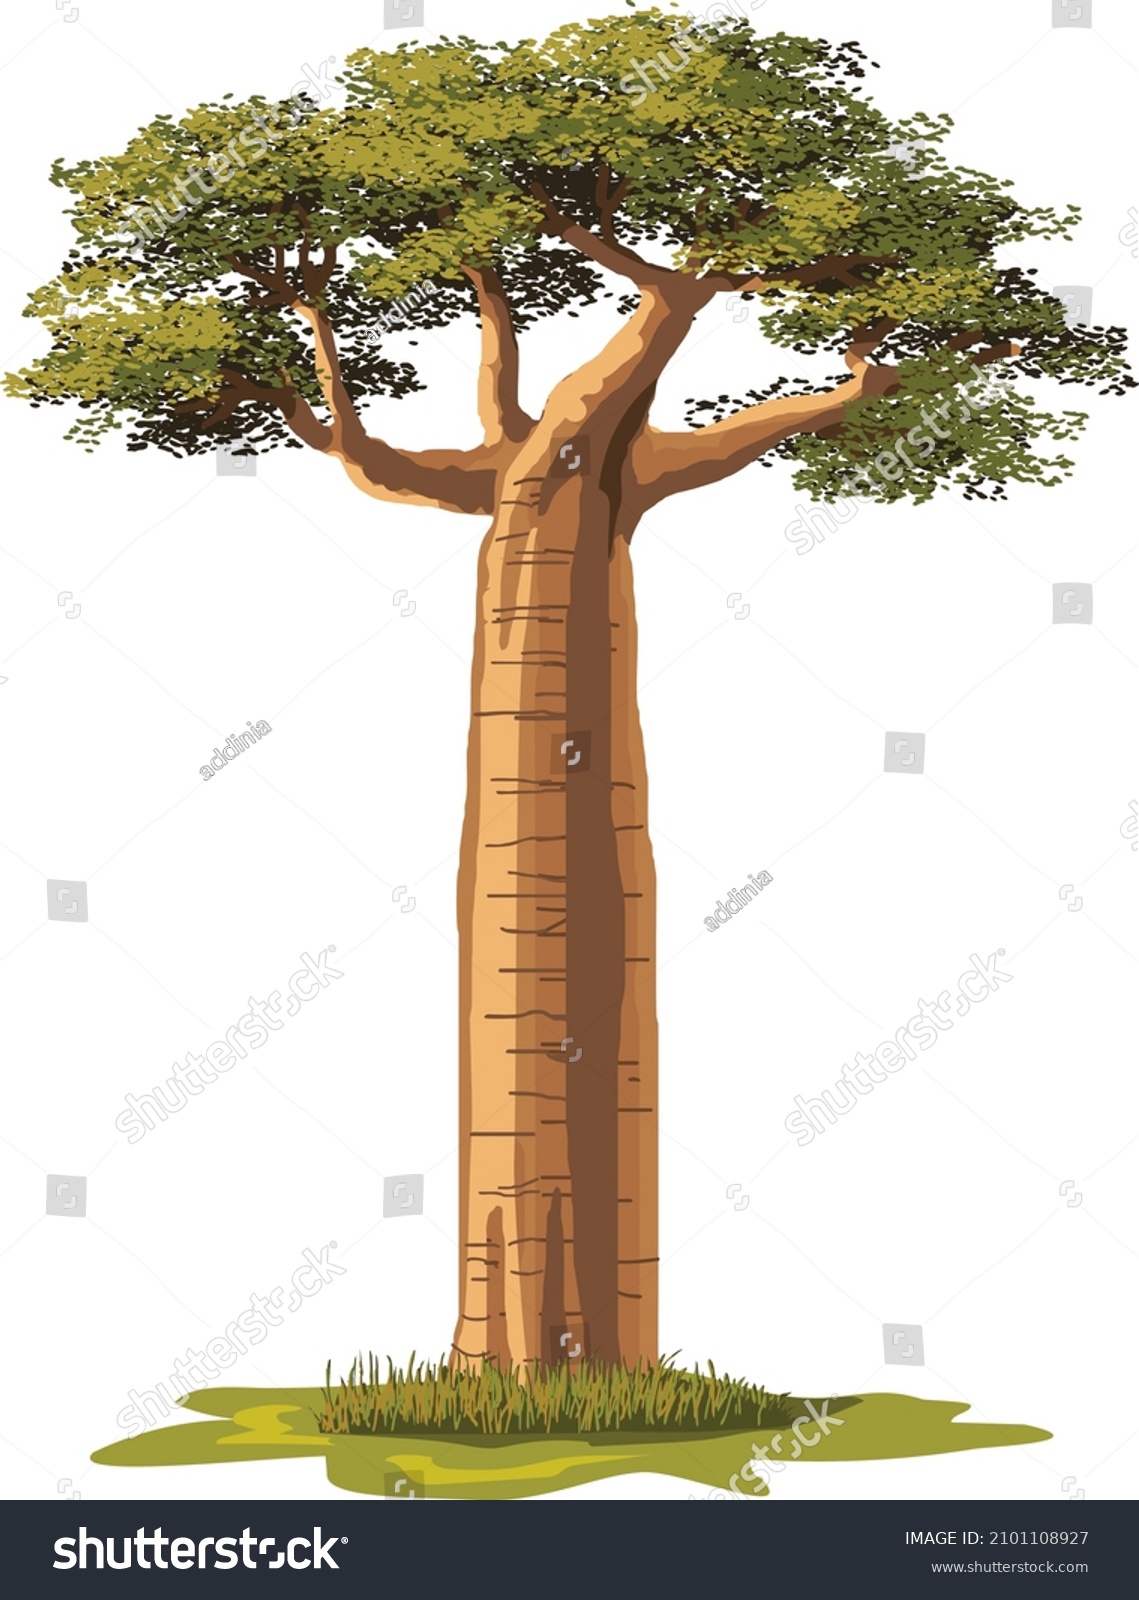 SVG of baobab tree - A unique tree of Madagascar, vector illustration isolated on a white background  svg